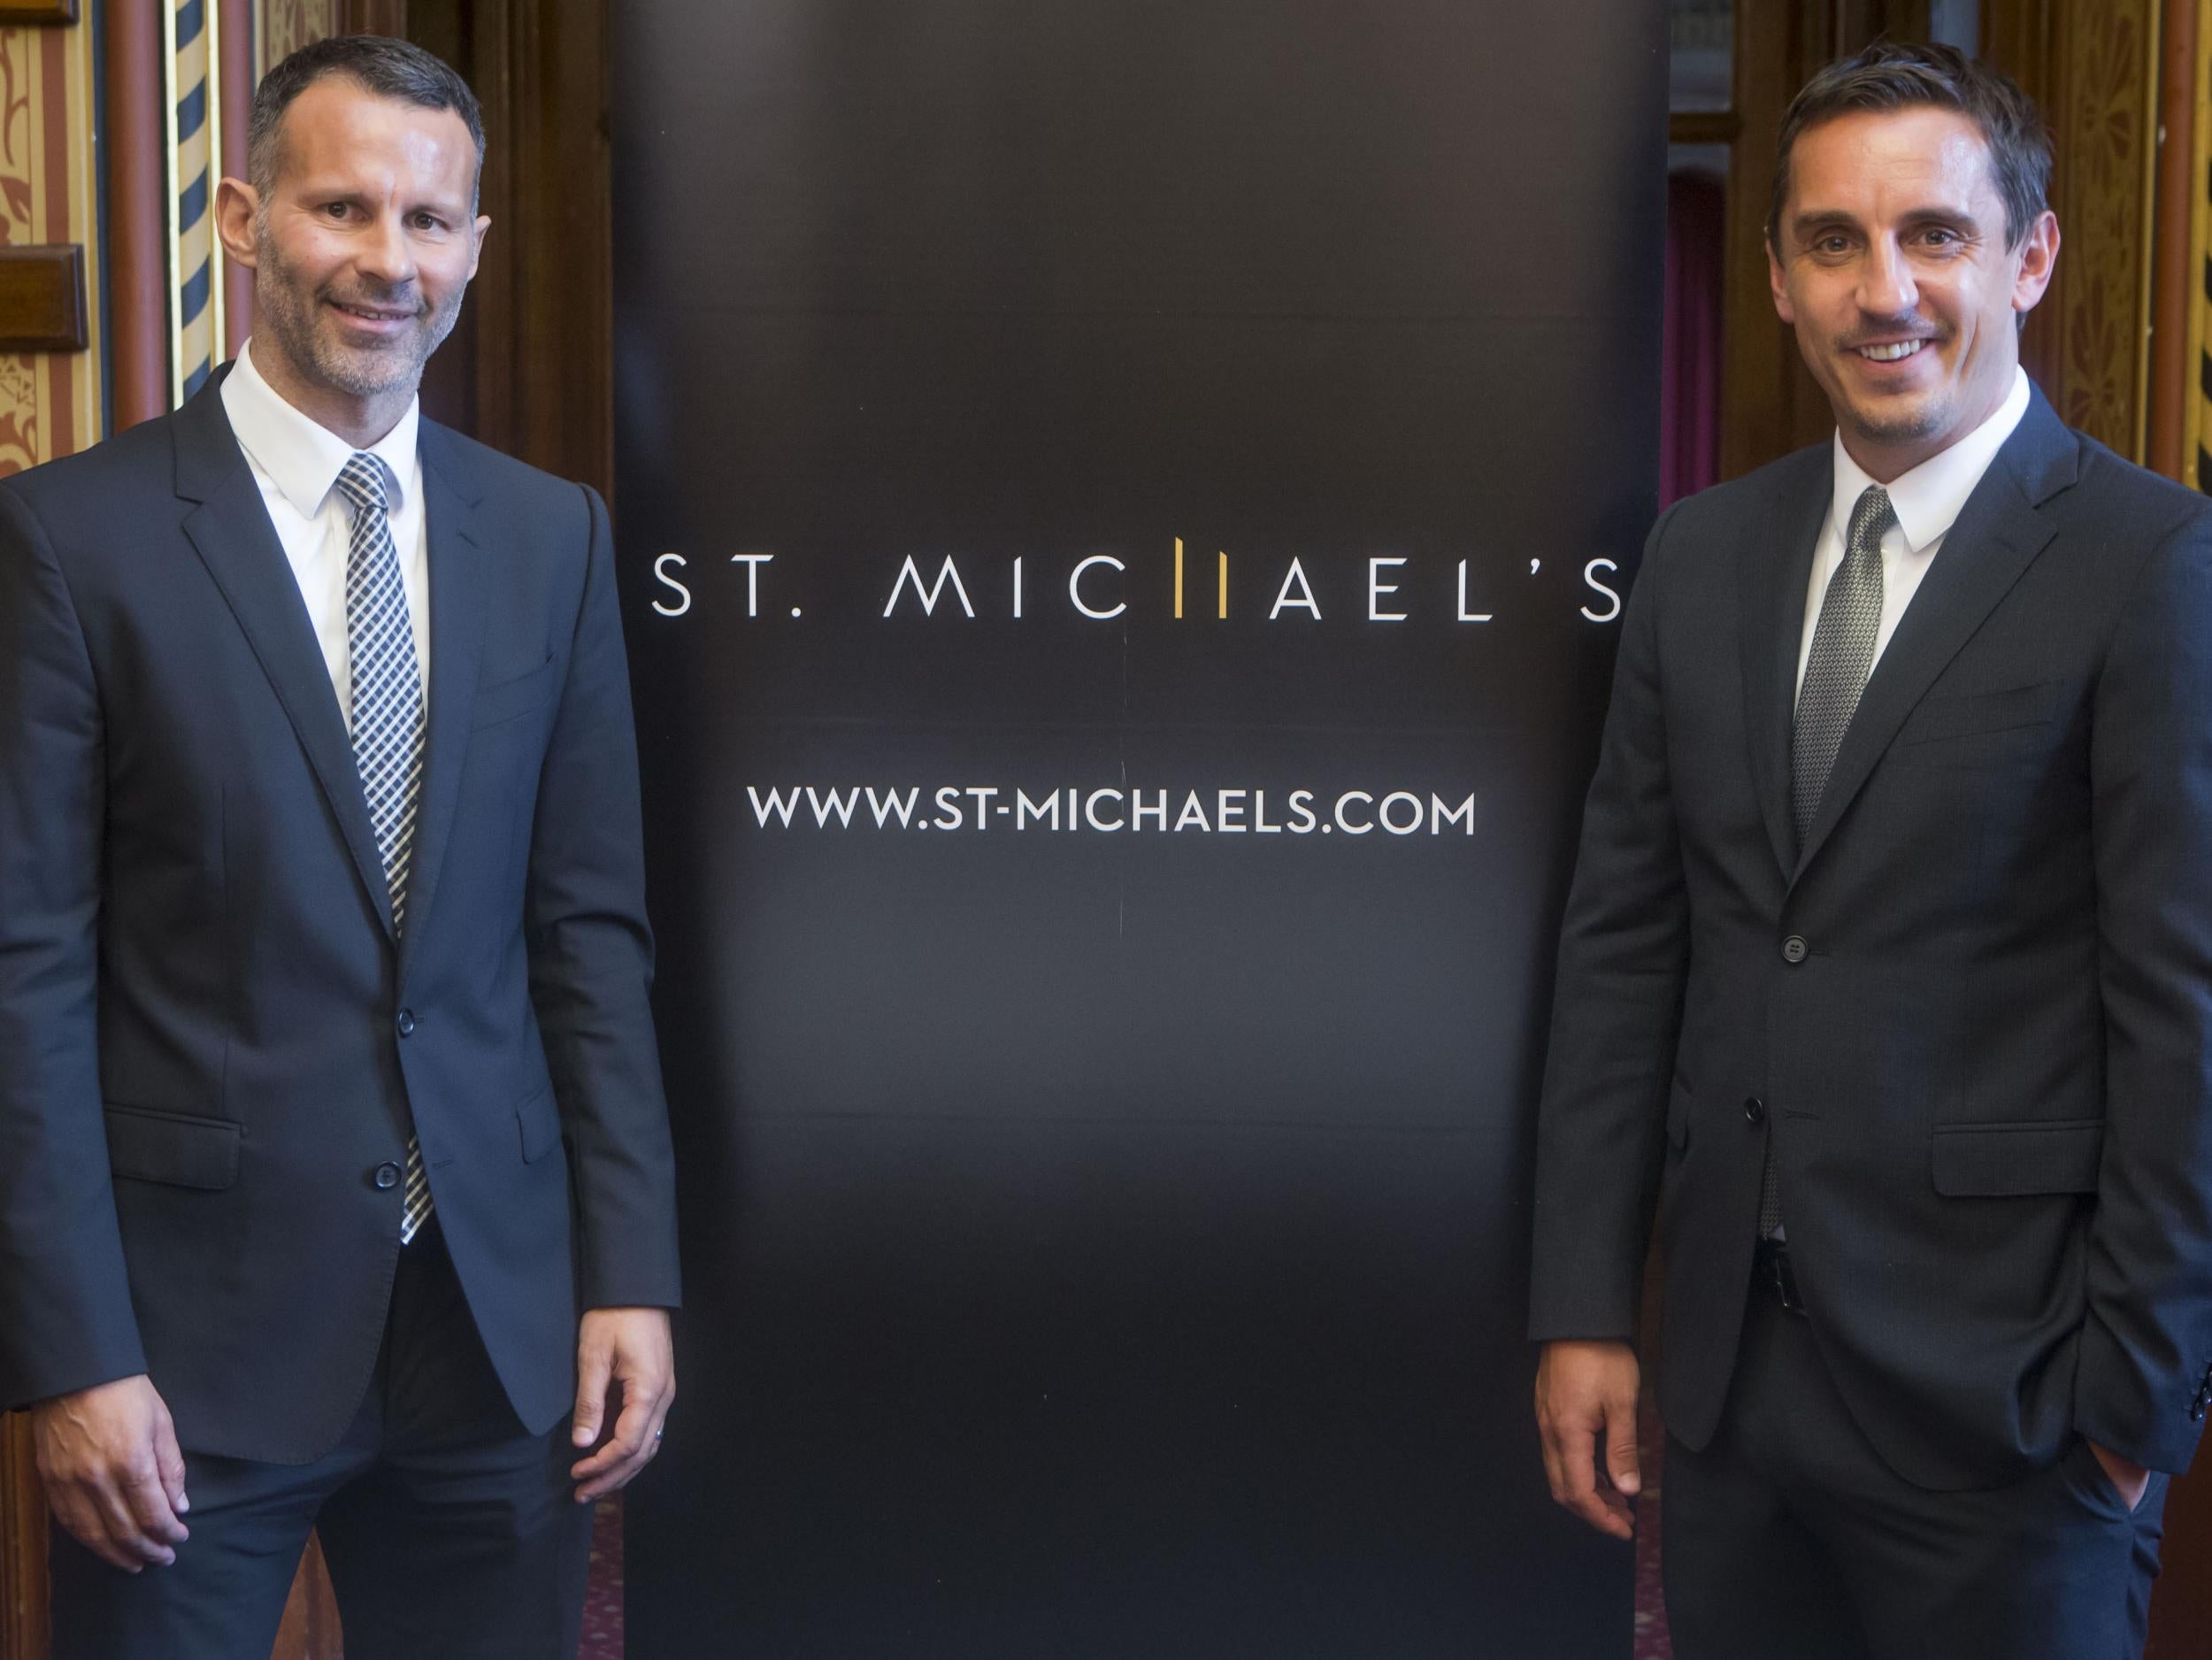 Football stars Ryan Giggs and Gary Neville unveil their multi-million-pound plans to build two new skyscrapers in central Manchester